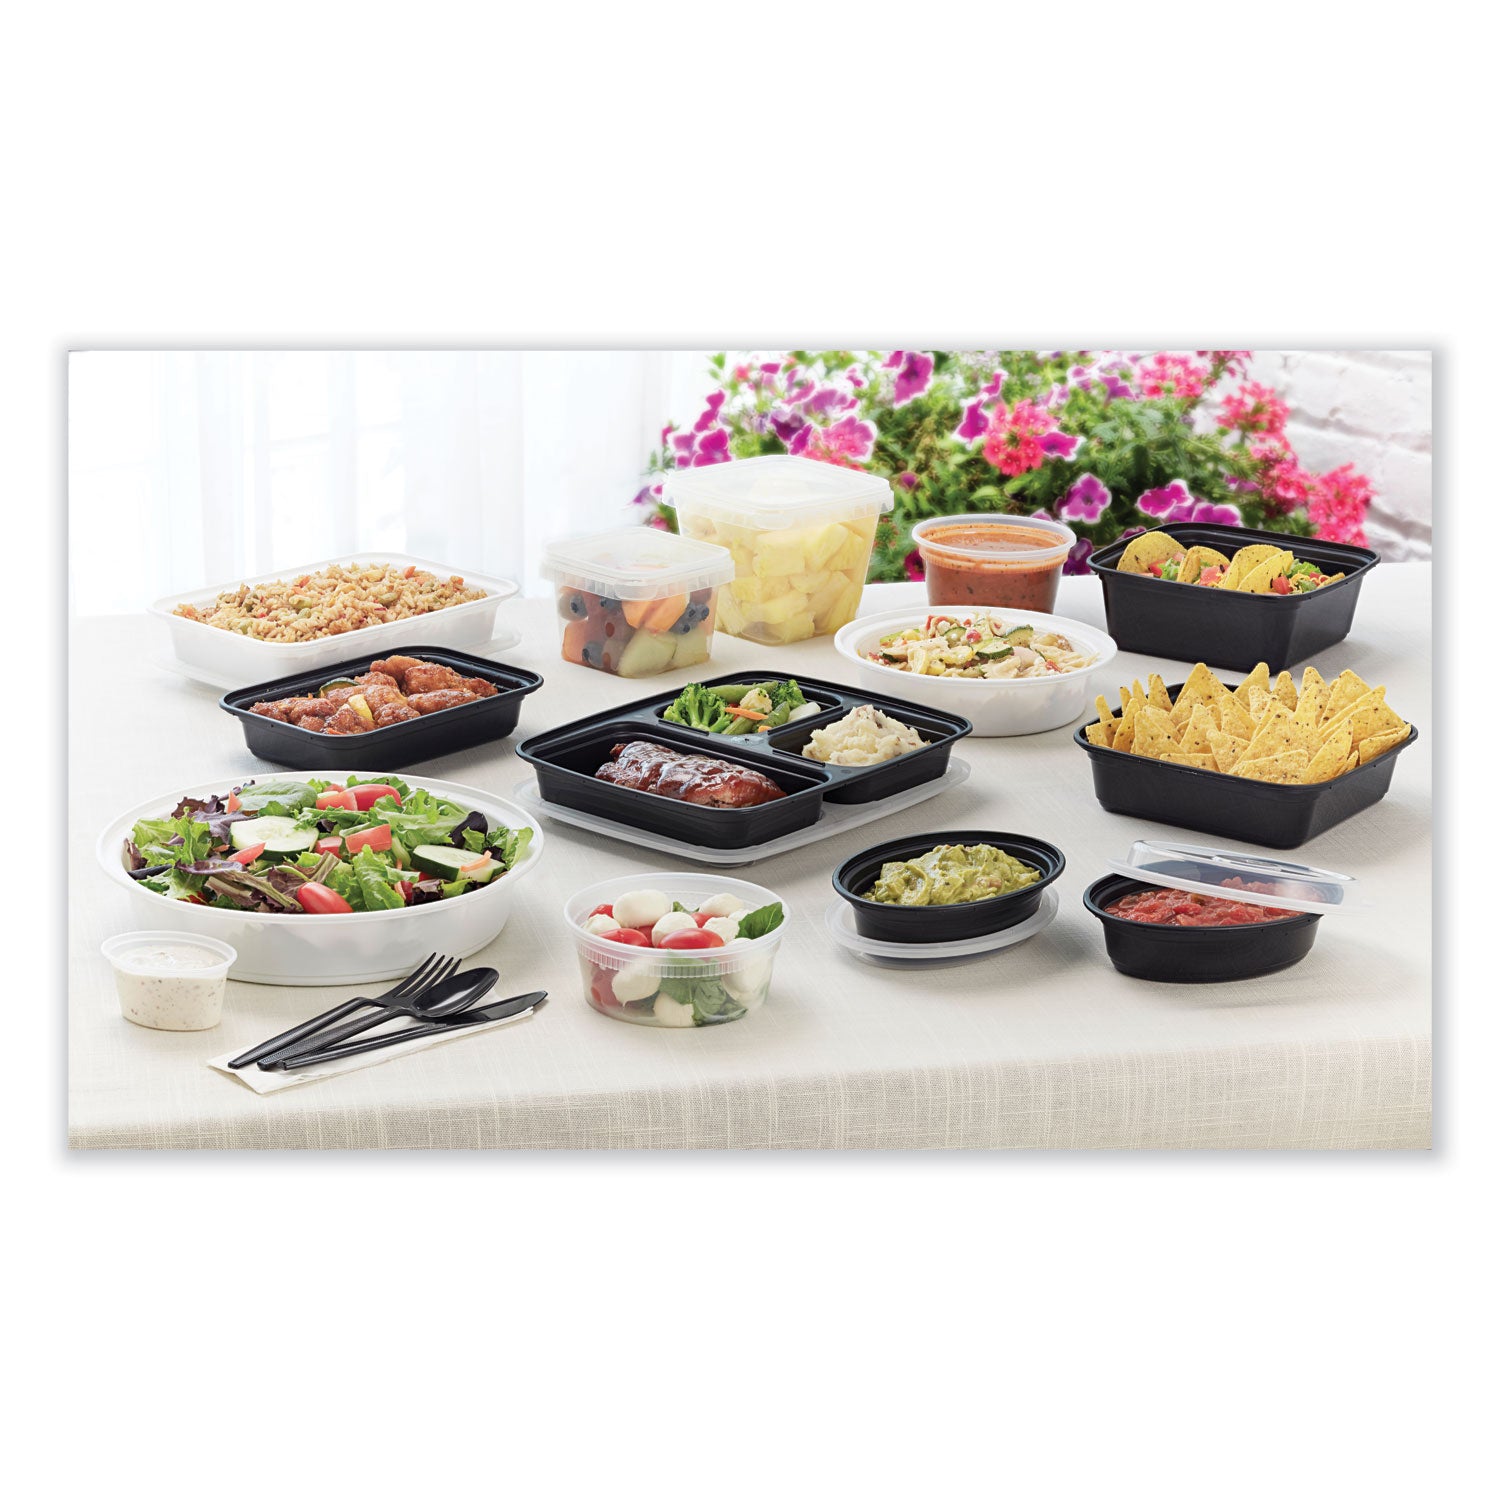 newspring-versatainer-microwavable-containers-oval-8-oz-57-x-4-x-145-black-clear-plastic-150-carton_pctoc08b - 4